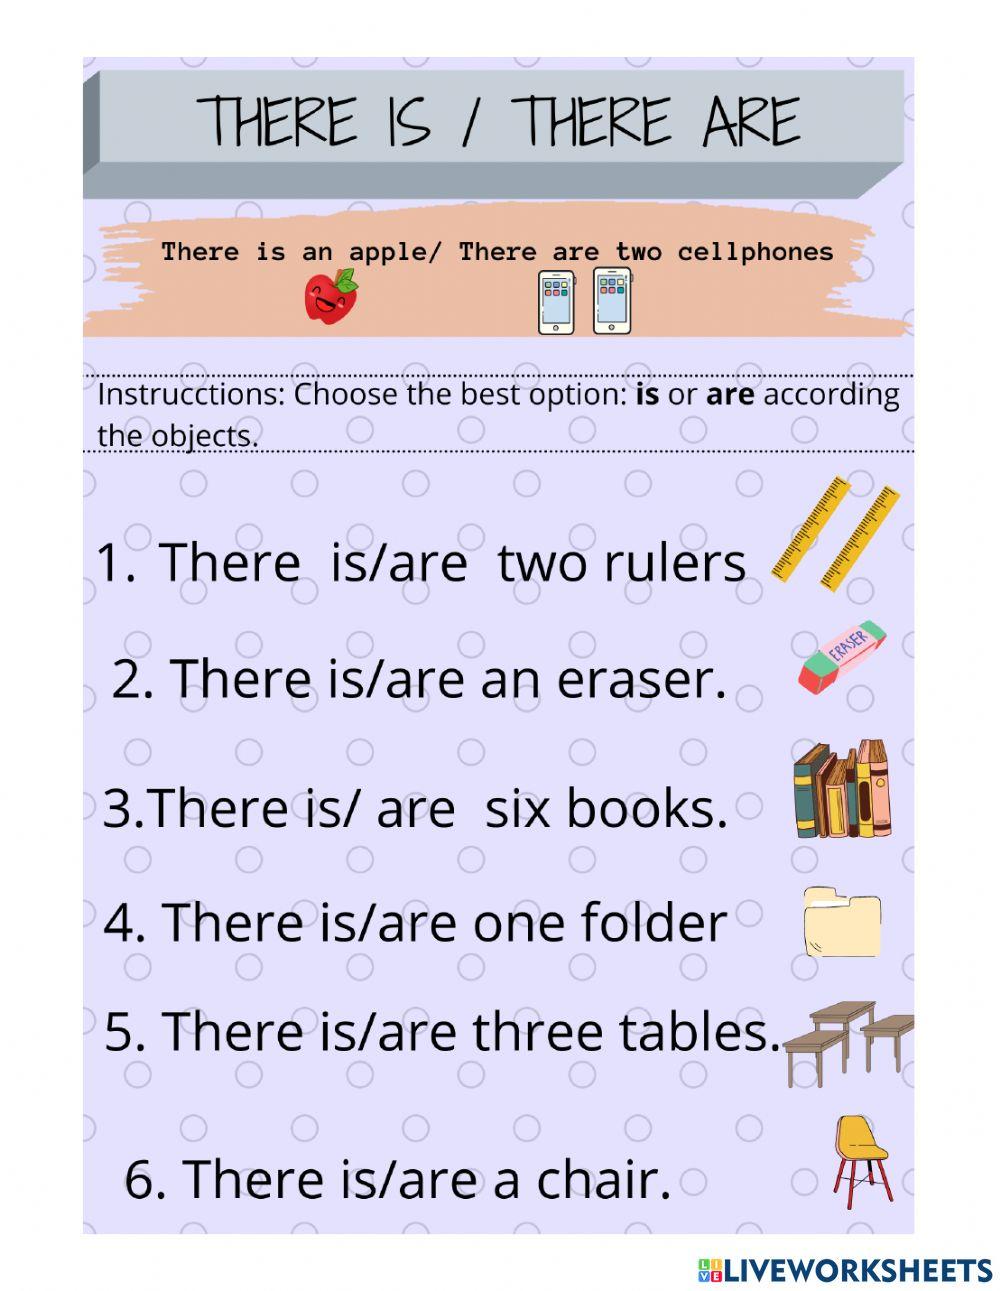 Classroom objects online exercise for grade 8 | Live Worksheets